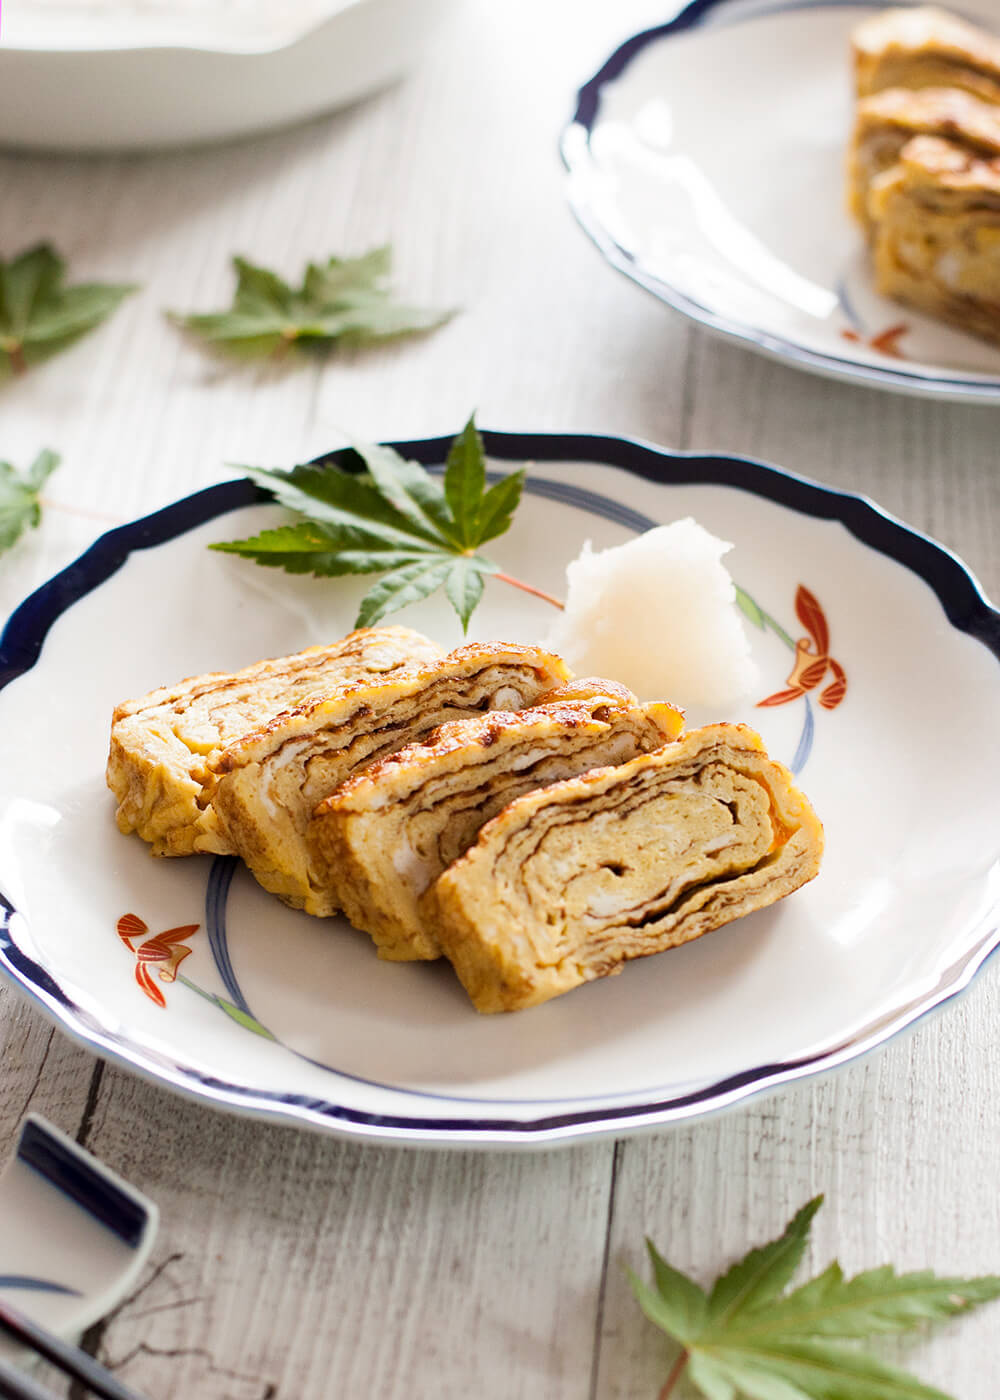 The typical egg dish in Japanese cuisine, dashimaki tamago (出し巻き卵, Japanese rolled omelette) is made by rolling thin layers of egg in the frypan. The beautiful layers of the egg when sliced, and the sweet dashi flavour make this omelette so unique.